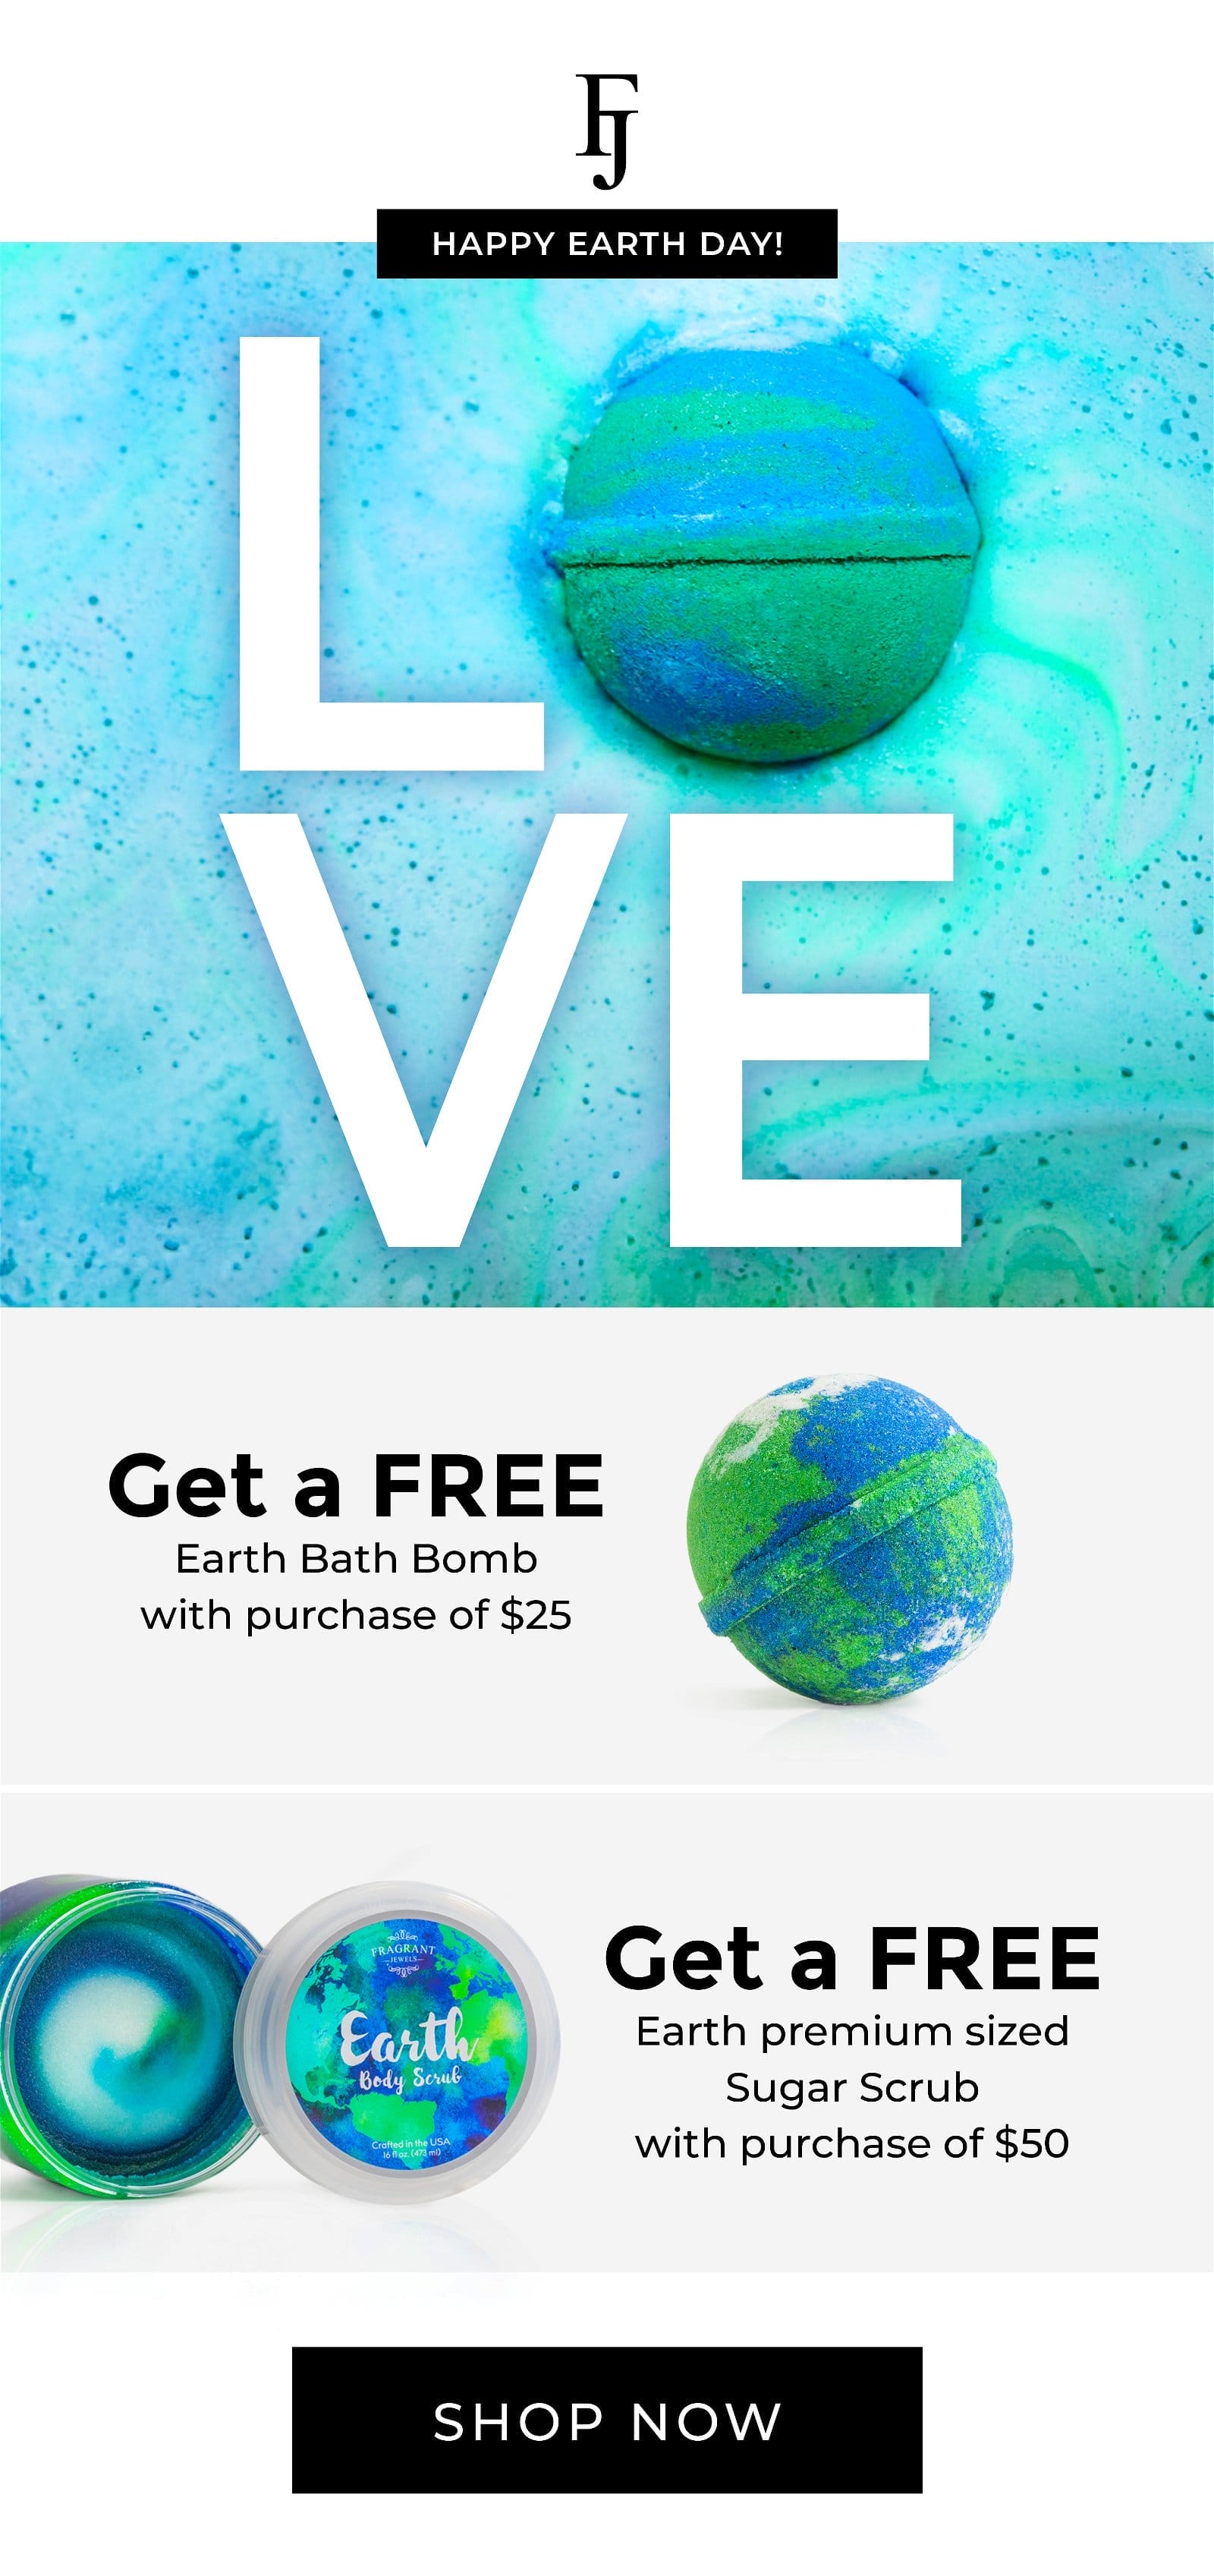 Earth Day Giveaway